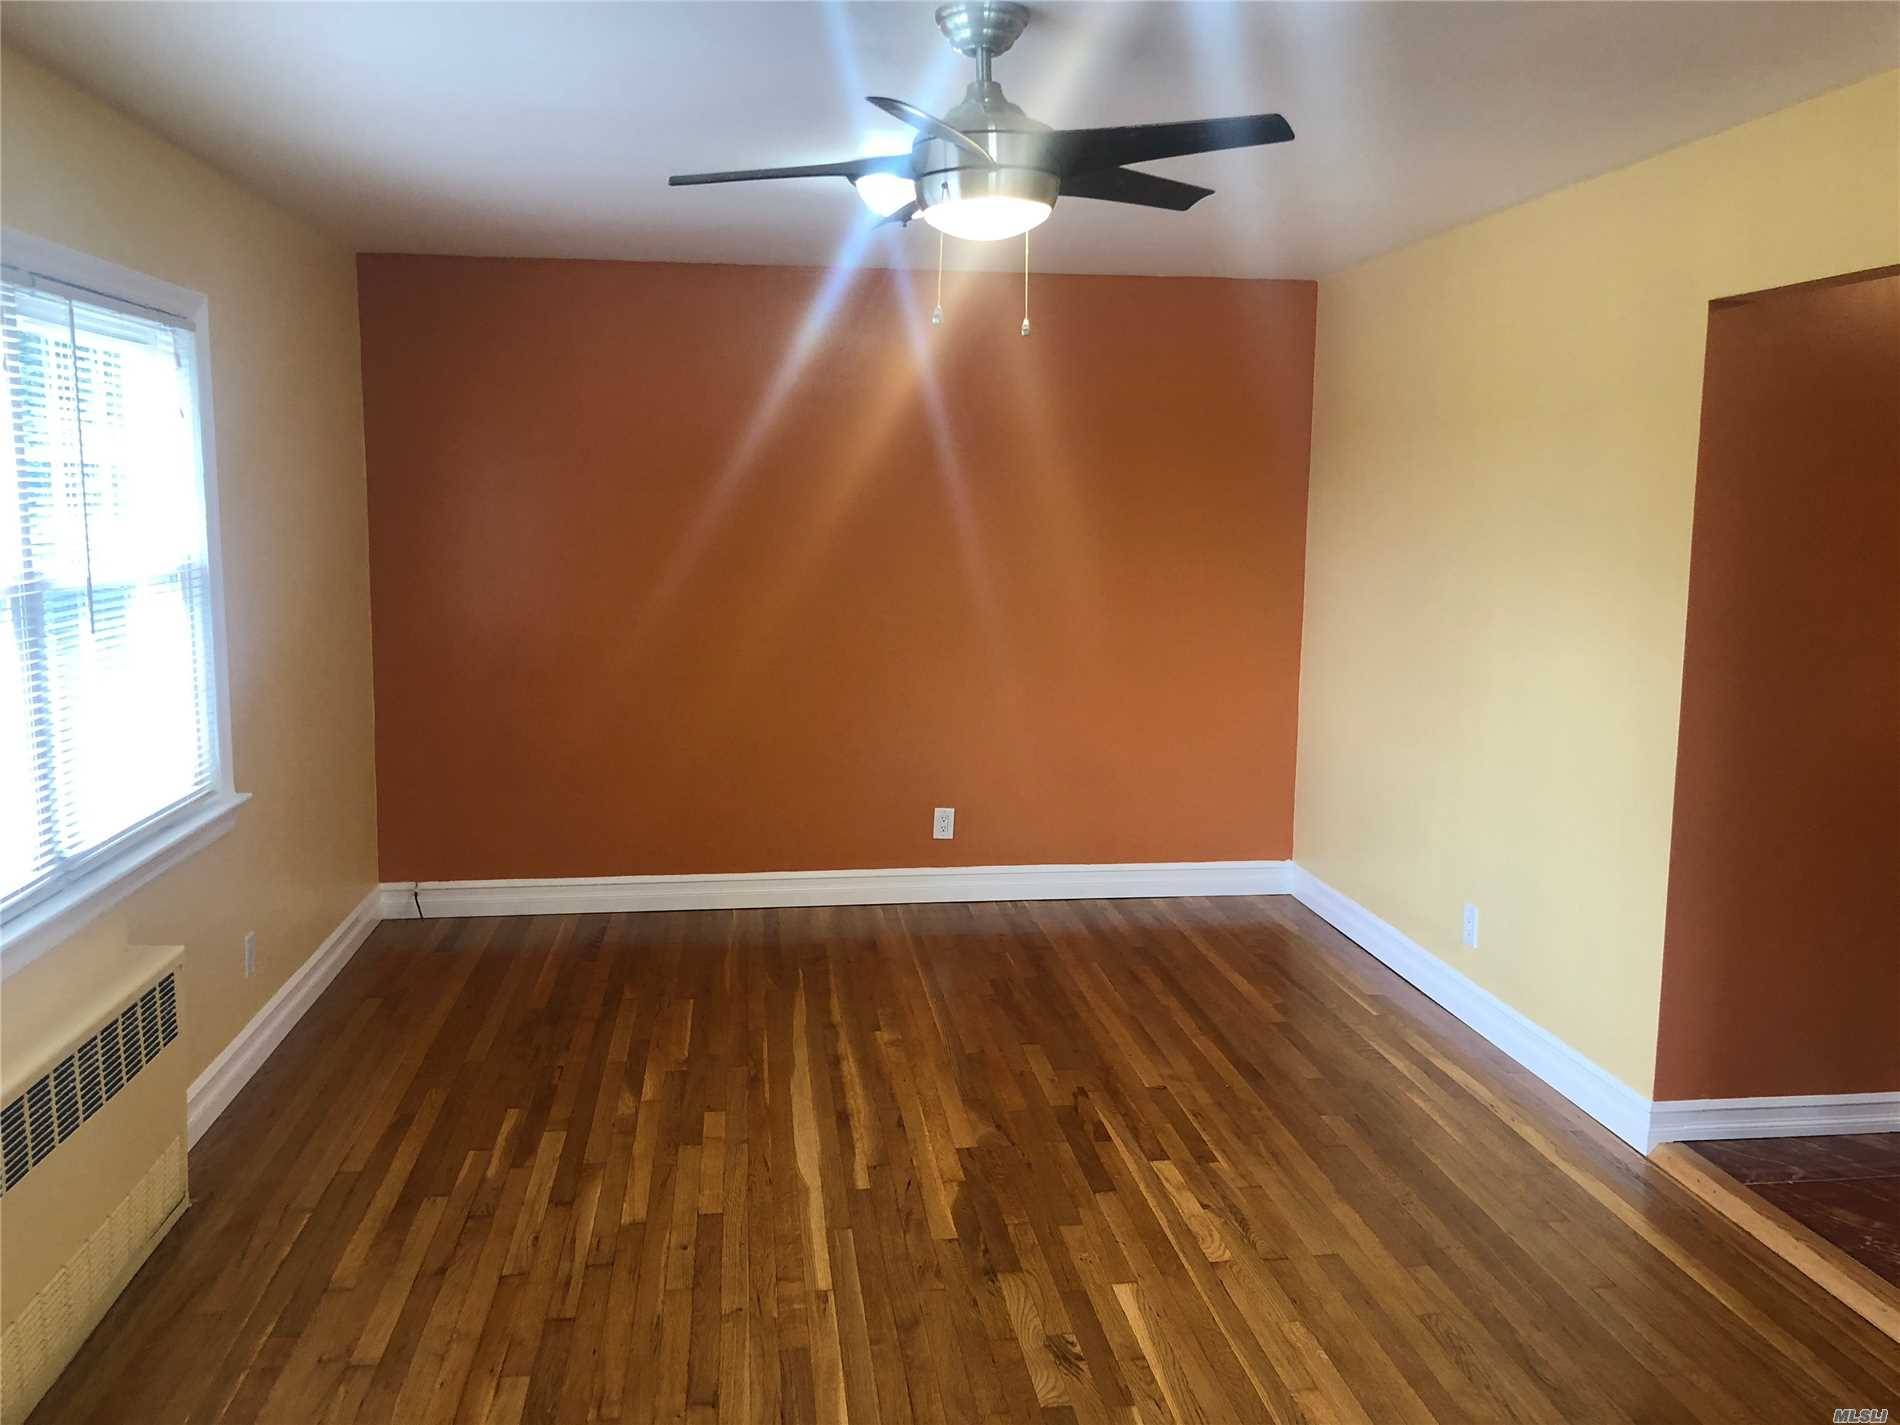 3 BR House Ozone Park LIC / Queens